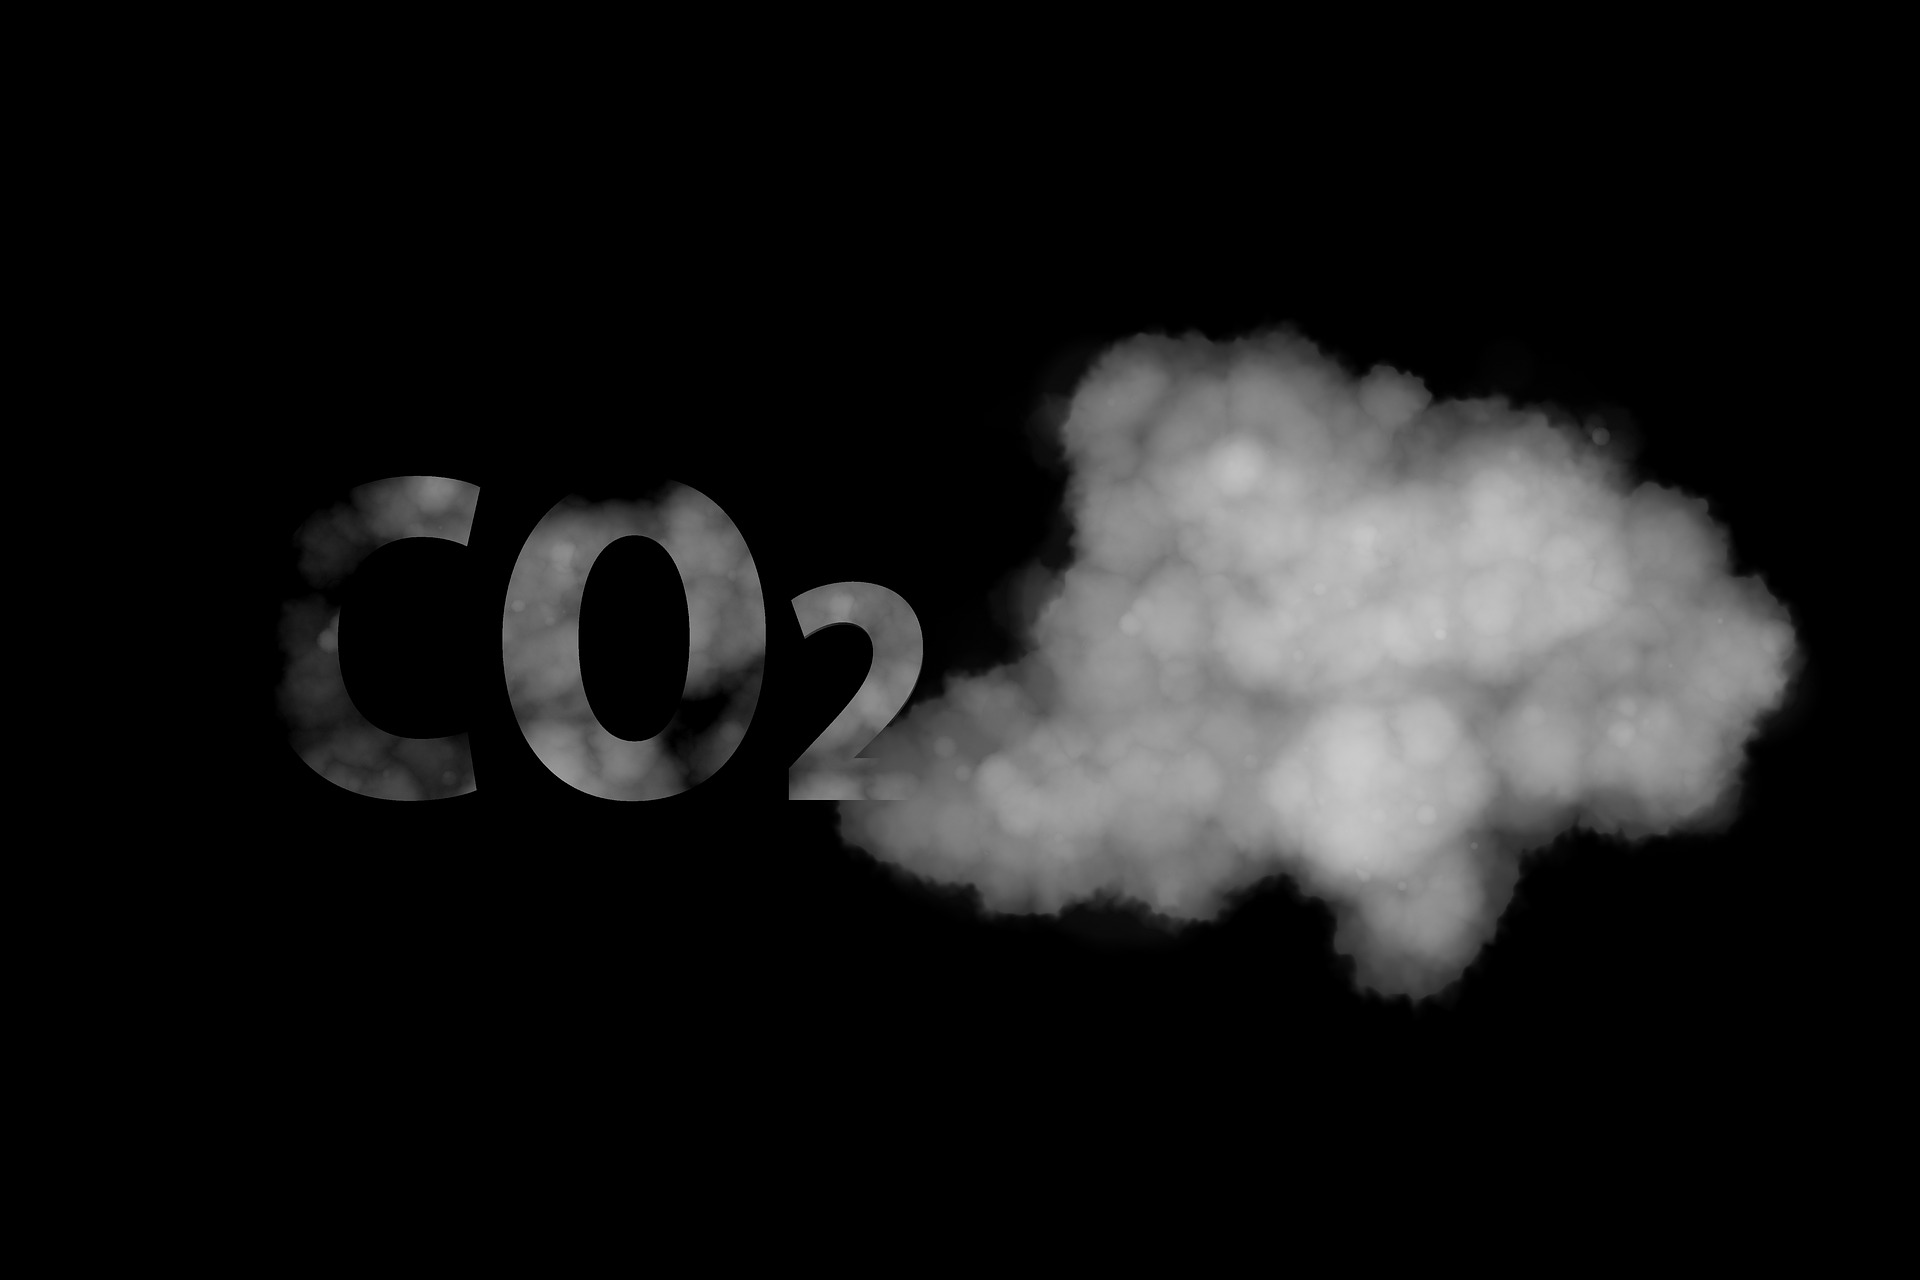 CO2 Levels in Buildings